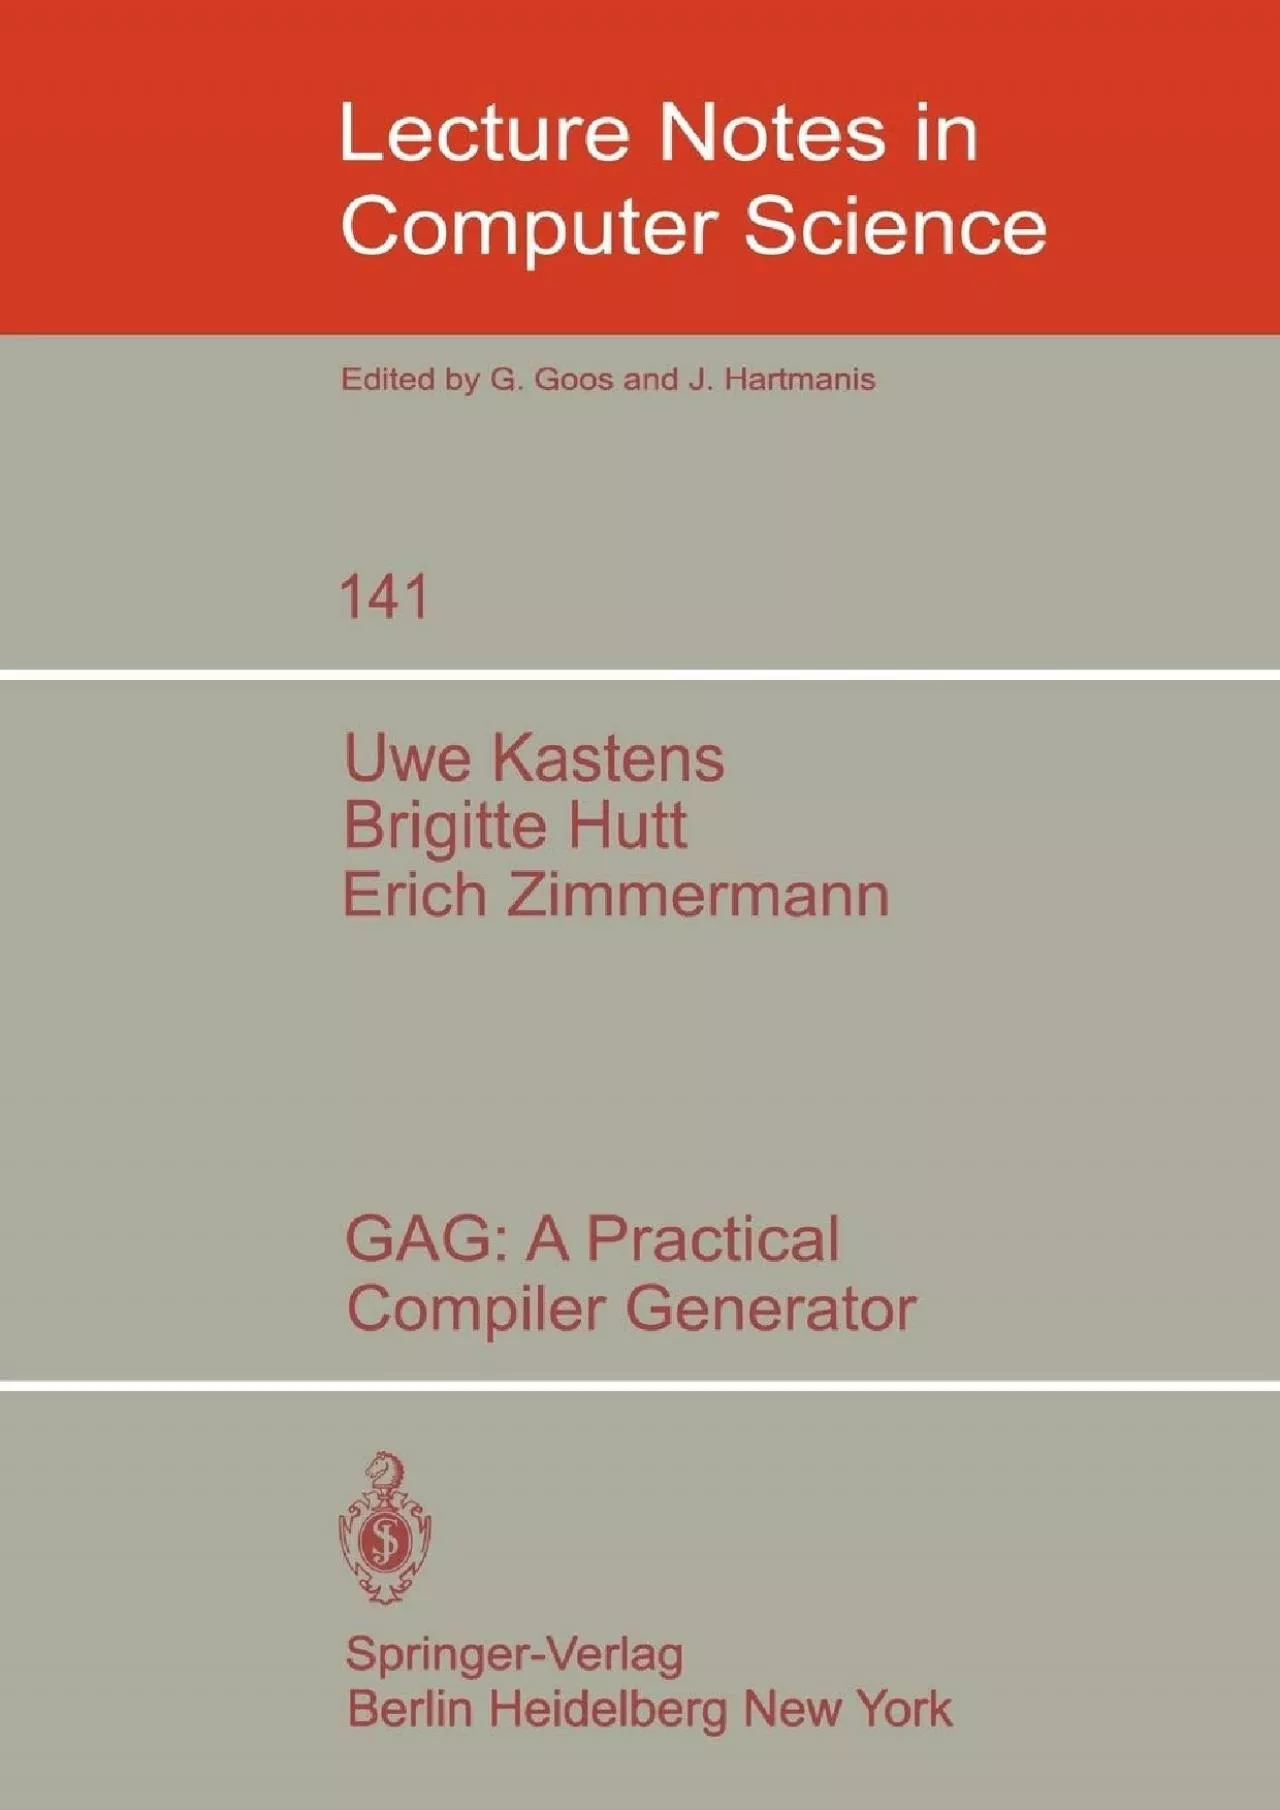 [READING BOOK]-GAG: A Practical Compiler Generator (Lecture Notes in Computer Science,